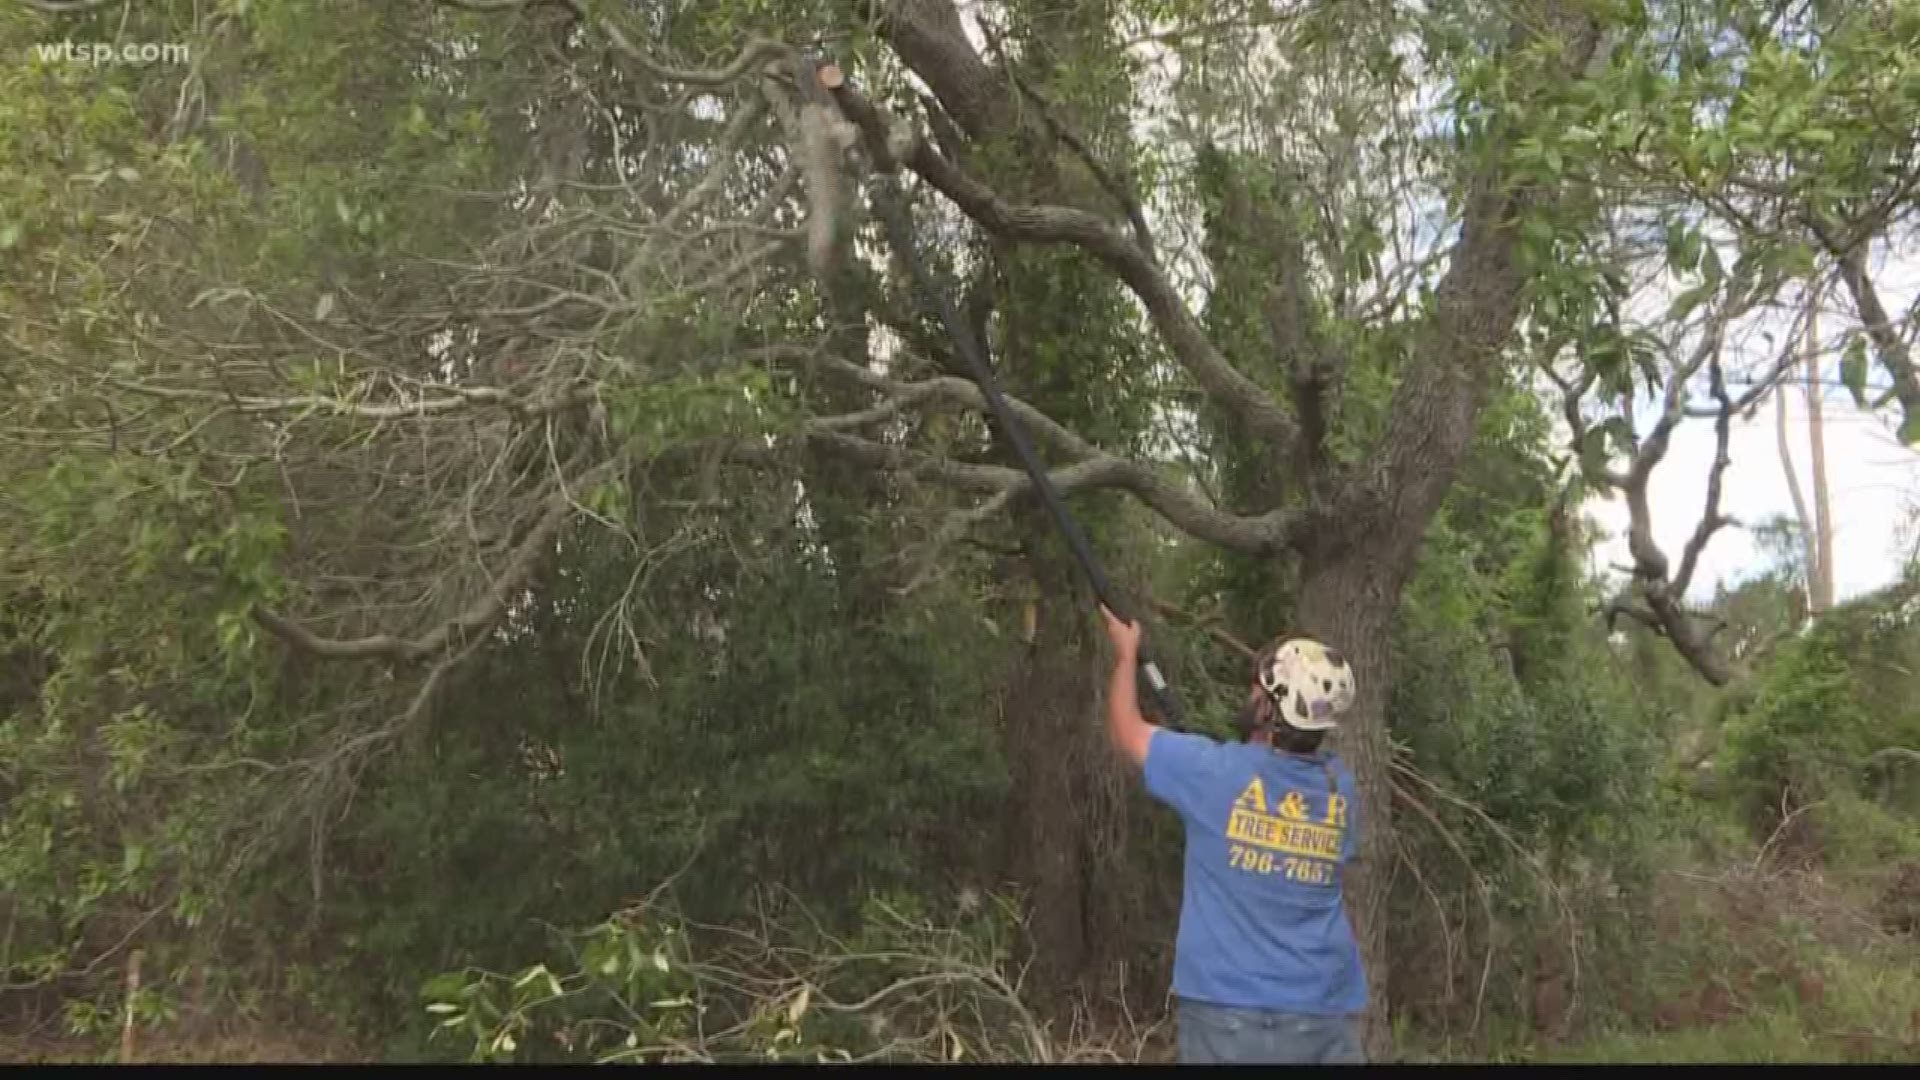 Part of preparing for hurricane season is making sure the trees around your home don't pose a risk if a storm were to hit.

Up until recently, if you wanted to remove a tree on your property, you probably had to get a permit from the city or town you live in but that's not the case anymore.

A new law in Florida bans local governments from regulating tree removal and re-planting on private property.